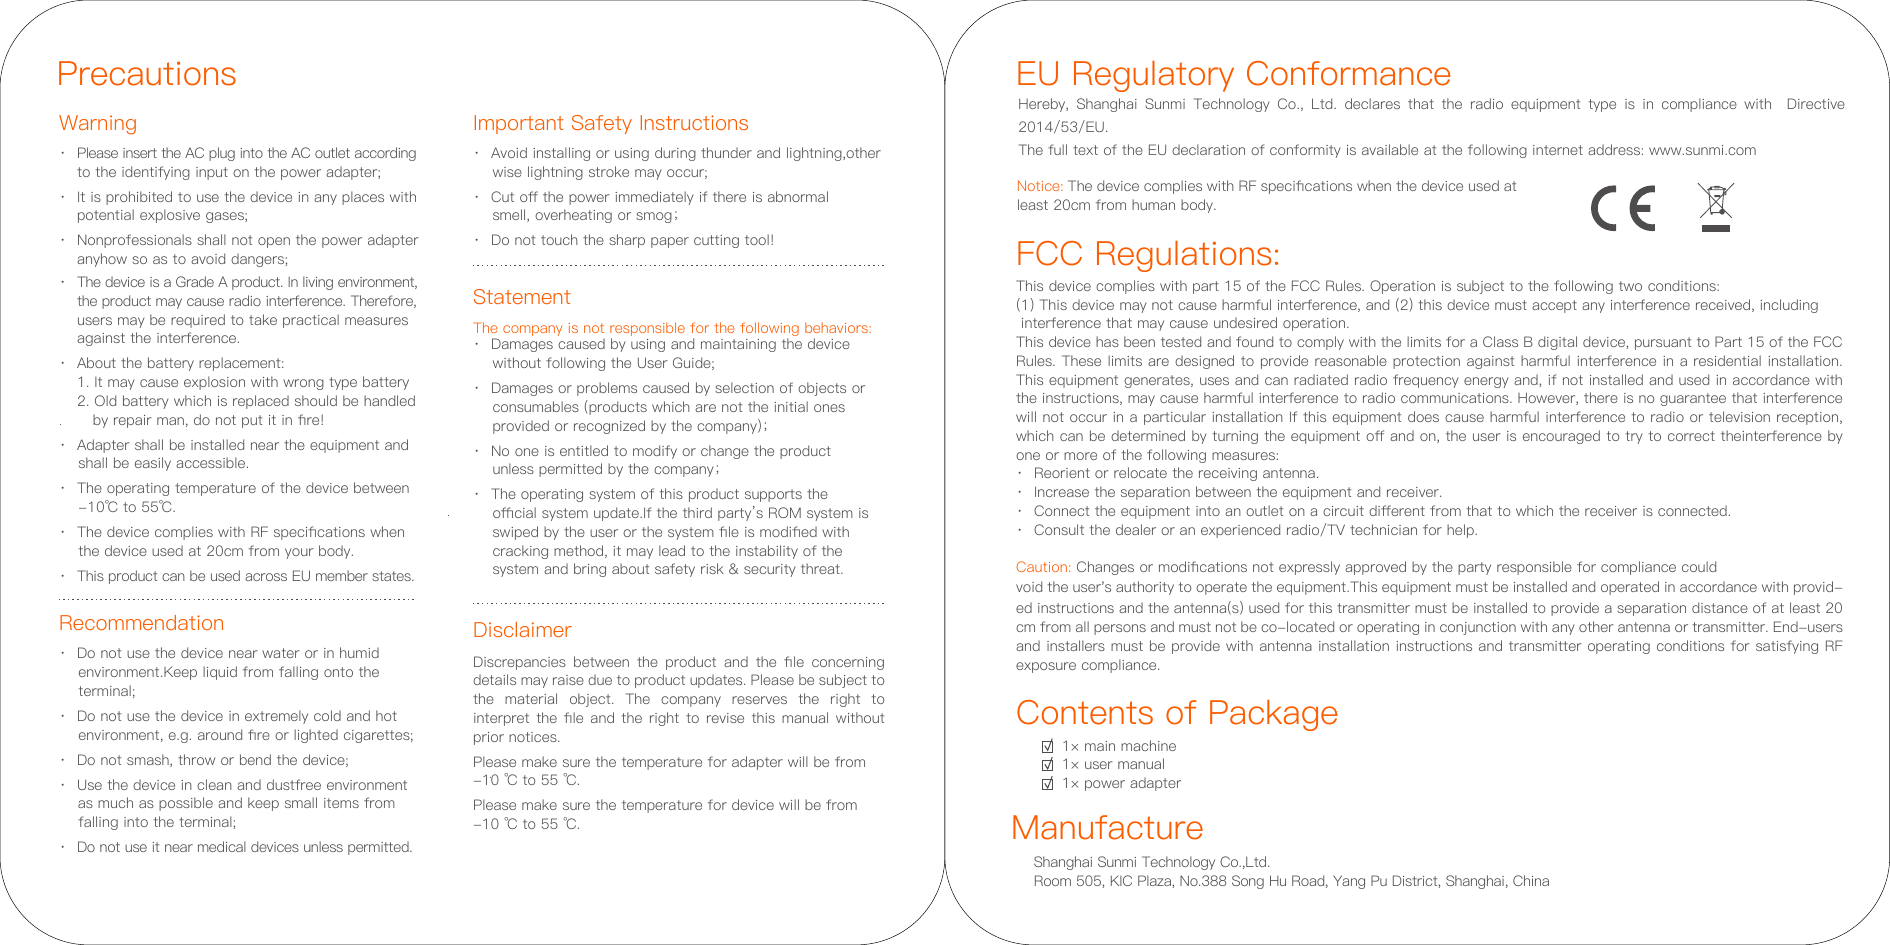 Contents of Package1× main machine1× user manual1× power adapterFCC Regulations:This device complies with part 15 of the FCC Rules. Operation is subject to the following two conditions: (1) This device may not cause harmful interference, and (2) this device must accept any interference received, including interference that may cause undesired operation.This device has been tested and found to comply with the limits for a Class B digital device, pursuant to Part 15 of the FCC Rules. These limits are designed to provide reasonable protection against harmful interference in a residential installation. This equipment generates, uses and can radiated radio frequency energy and, if not installed and used in accordance with the instructions, may cause harmful interference to radio communications. However, there is no guarantee that interference will not occur in a particular installation If this equipment does cause harmful interference to radio or television reception, which can be determined by turning the equipment oﬀ and on, the user is encouraged to try to correct theinterference by one or more of the following measures:·  Reorient or relocate the receiving antenna.·  Increase the separation between the equipment and receiver.·  Connect the equipment into an outlet on a circuit diﬀerent from that to which the receiver is connected.·  Consult the dealer or an experienced radio/TV technician for help.Caution: Changes or modiﬁcations not expressly approved by the party responsible for compliance could void the user&apos;s authority to operate the equipment.This equipment must be installed and operated in accordance with provid-ed instructions and the antenna(s) used for this transmitter must be installed to provide a separation distance of at least 20 cm from all persons and must not be co-located or operating in conjunction with any other antenna or transmitter. End-users and installers must be provide with antenna installation instructions and transmitter operating conditions for satisfying RF exposure compliance.EU Regulatory ConformanceHereby, Shanghai Sunmi Technology Co., Ltd. declares that the radio equipment type is in compliance with  Directive 2014/53/EU. The full text of the EU declaration of conformity is available at the following internet address: www.sunmi.comNotice: The device complies with RF speciﬁcations when the device used at least 20cm from human body. Shanghai Sunmi Technology Co.,Ltd. Room 505, KIC Plaza, No.388 Song Hu Road, Yang Pu District, Shanghai, China Manufacture PrecautionsWarning Important Safety InstructionsRecommendation·  Please insert the AC plug into the AC outlet according    to the identifying input on the power adapter;·  It is prohibited to use the device in any places with   potential explosive gases;·  Nonprofessionals shall not open the power adapter   anyhow so as to avoid dangers;·  The device is a Grade A product. In living environment, the product may cause radio interference. Therefore,  users may be required to take practical measures   against the interference.·  About the battery replacement:  1. It may cause explosion with wrong type battery   2. Old battery which is replaced should be handled      by repair man, do not put it in ﬁre!·  Adapter shall be installed near the equipment and     shall be easily accessible.·  The operating temperature of the device between      -10℃ to 55℃.·  The device complies with RF speciﬁcations when     the device used at 20cm from your body.·  This product can be used across EU member states.Disclaimer·  Avoid installing or using during thunder and lightning,other      wise lightning stroke may occur;·  Cut oﬀ the power immediately if there is abnormal     smell, overheating or smog；·  Do not touch the sharp paper cutting tool!Discrepancies  between  the  product  and  the  ﬁle  concerning details may raise due to product updates. Please be subject to the material object. The company reserves the right to interpret the ﬁle and the right to revise this manual without prior notices.Please make sure the temperature for adapter will be from -10 ℃ to 55 ℃.Please make sure the temperature for device will be from -10 ℃ to 55 ℃.·  Do not use the device near water or in humid      environment.Keep liquid from falling onto the     terminal;·  Do not use the device in extremely cold and hot     environment, e.g. around ﬁre or lighted cigarettes;·  Do not smash, throw or bend the device;·  Use the device in clean and dustfree environment     as much as possible and keep small items from     falling into the terminal;·  Do not use it near medical devices unless permitted.StatementThe company is not responsible for the following behaviors:·  Damages caused by using and maintaining the device    without following the User Guide;·  Damages or problems caused by selection of objects or    consumables (products which are not the initial ones    provided or recognized by the company)；·  No one is entitled to modify or change the product    unless permitted by the company；·  The operating system of this product supports the    oﬃcial system update.If the third party’s ROM system is    swiped by the user or the system ﬁle is modiﬁed with    cracking method, it may lead to the instability of the    system and bring about safety risk &amp; security threat.